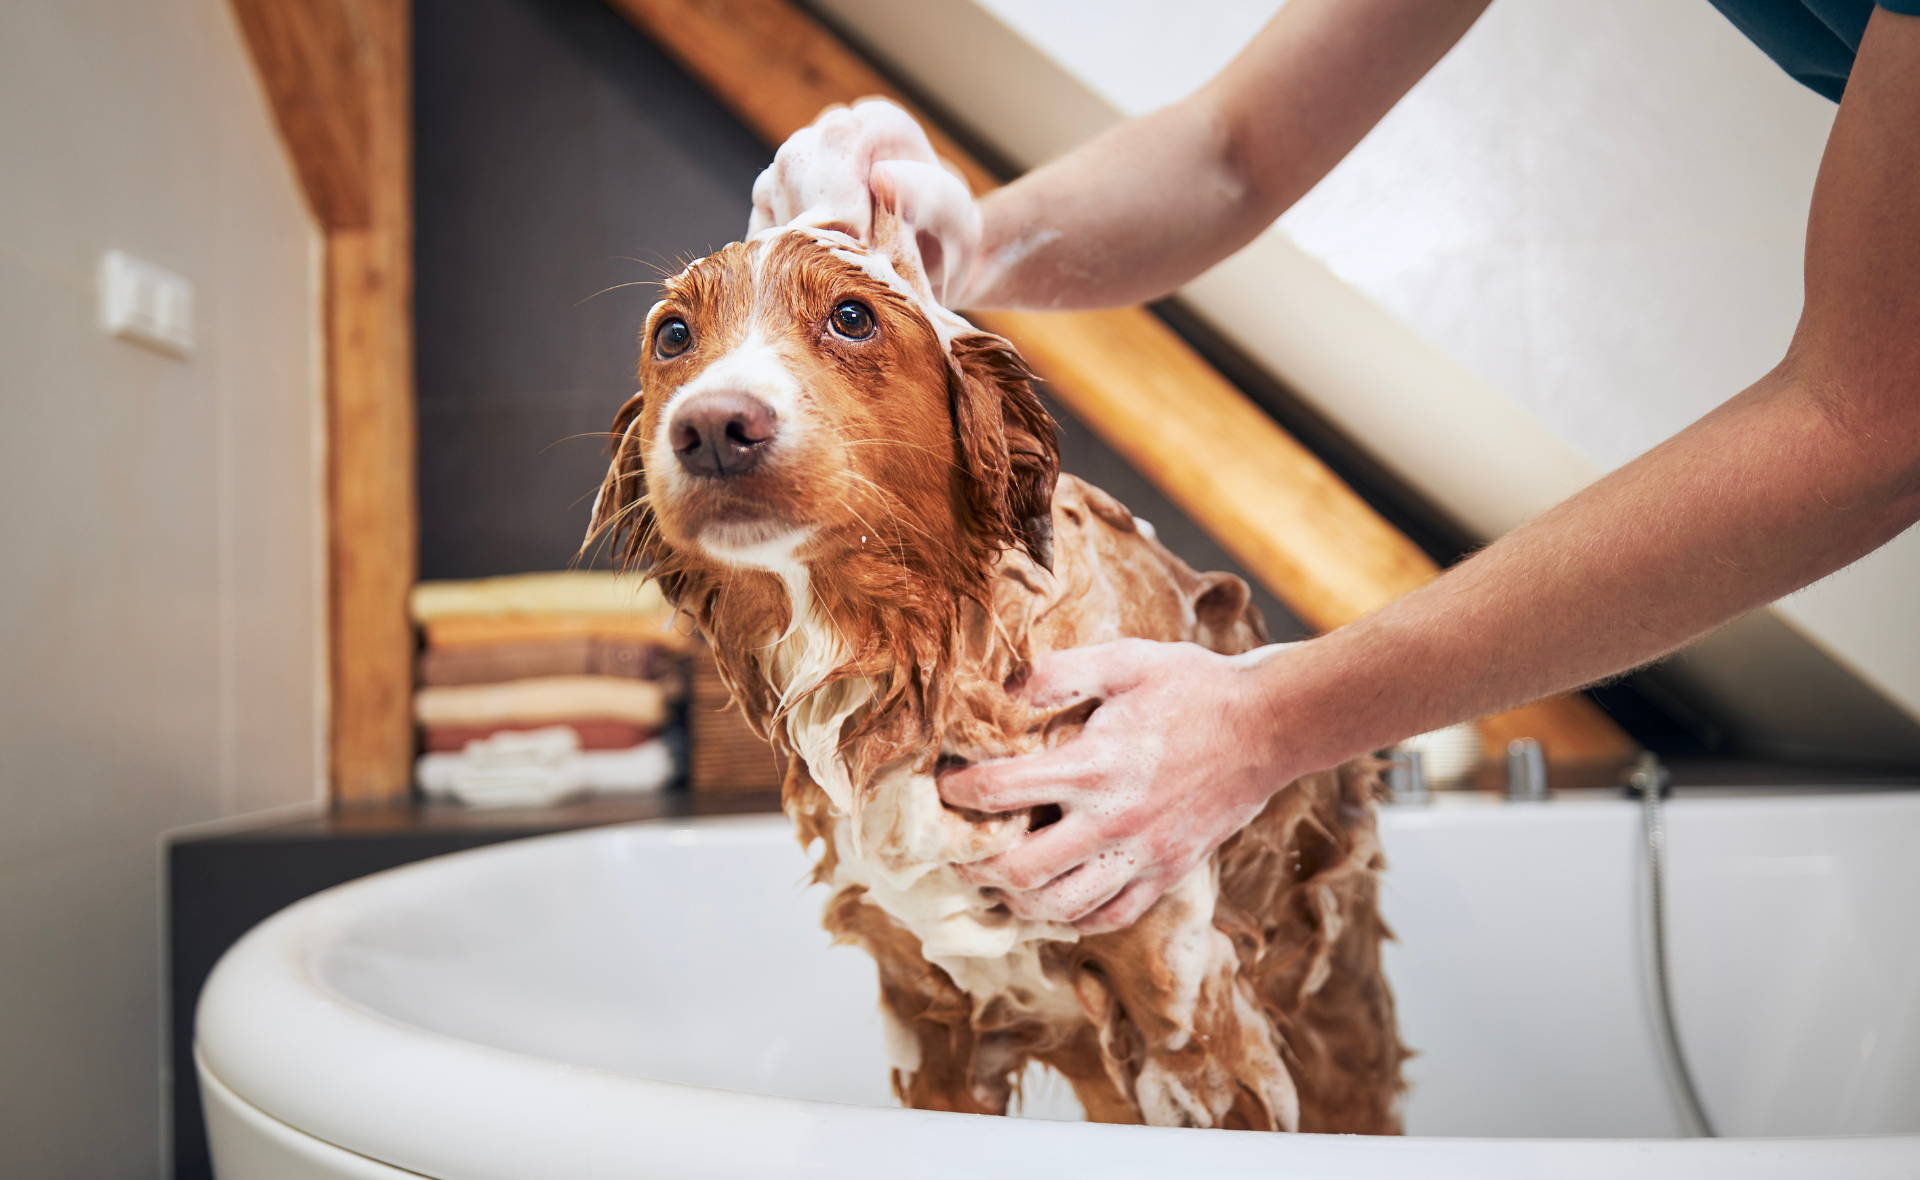 Dog getting a bath. Tips for grooming your dog at home and reduce grooming anxiety